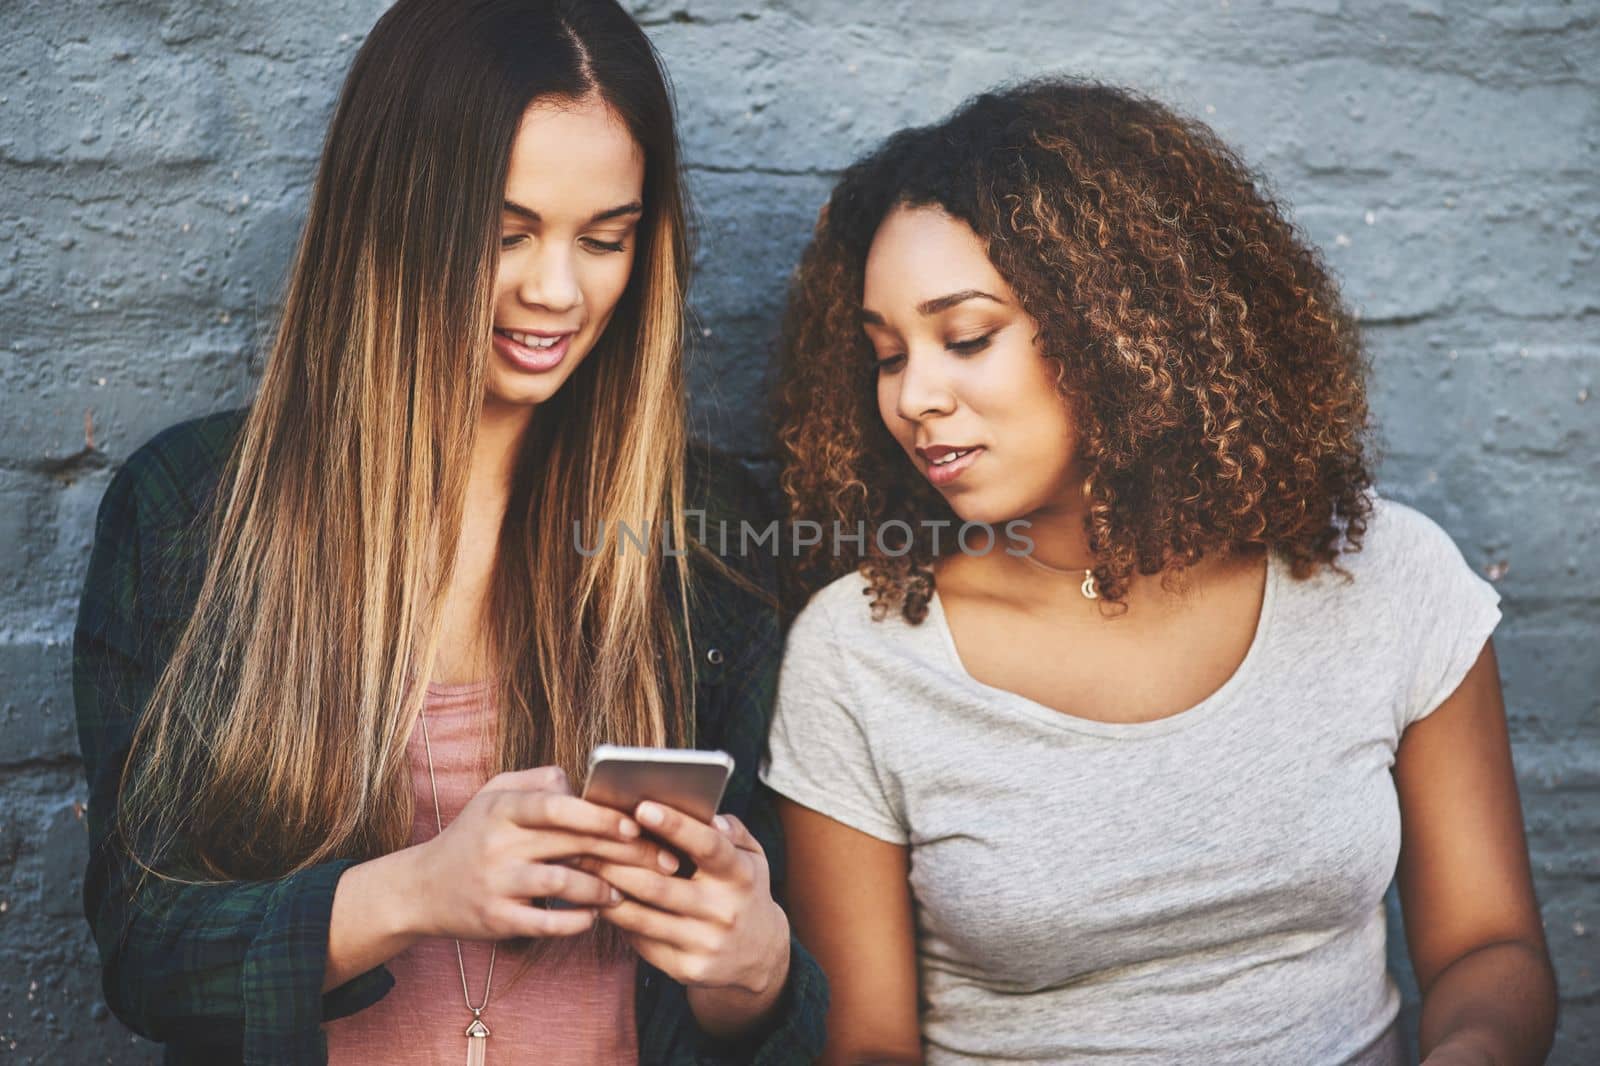 How todays youth keep up with the current trends. two young women standing outdoors and using a mobile phone against a gray wall